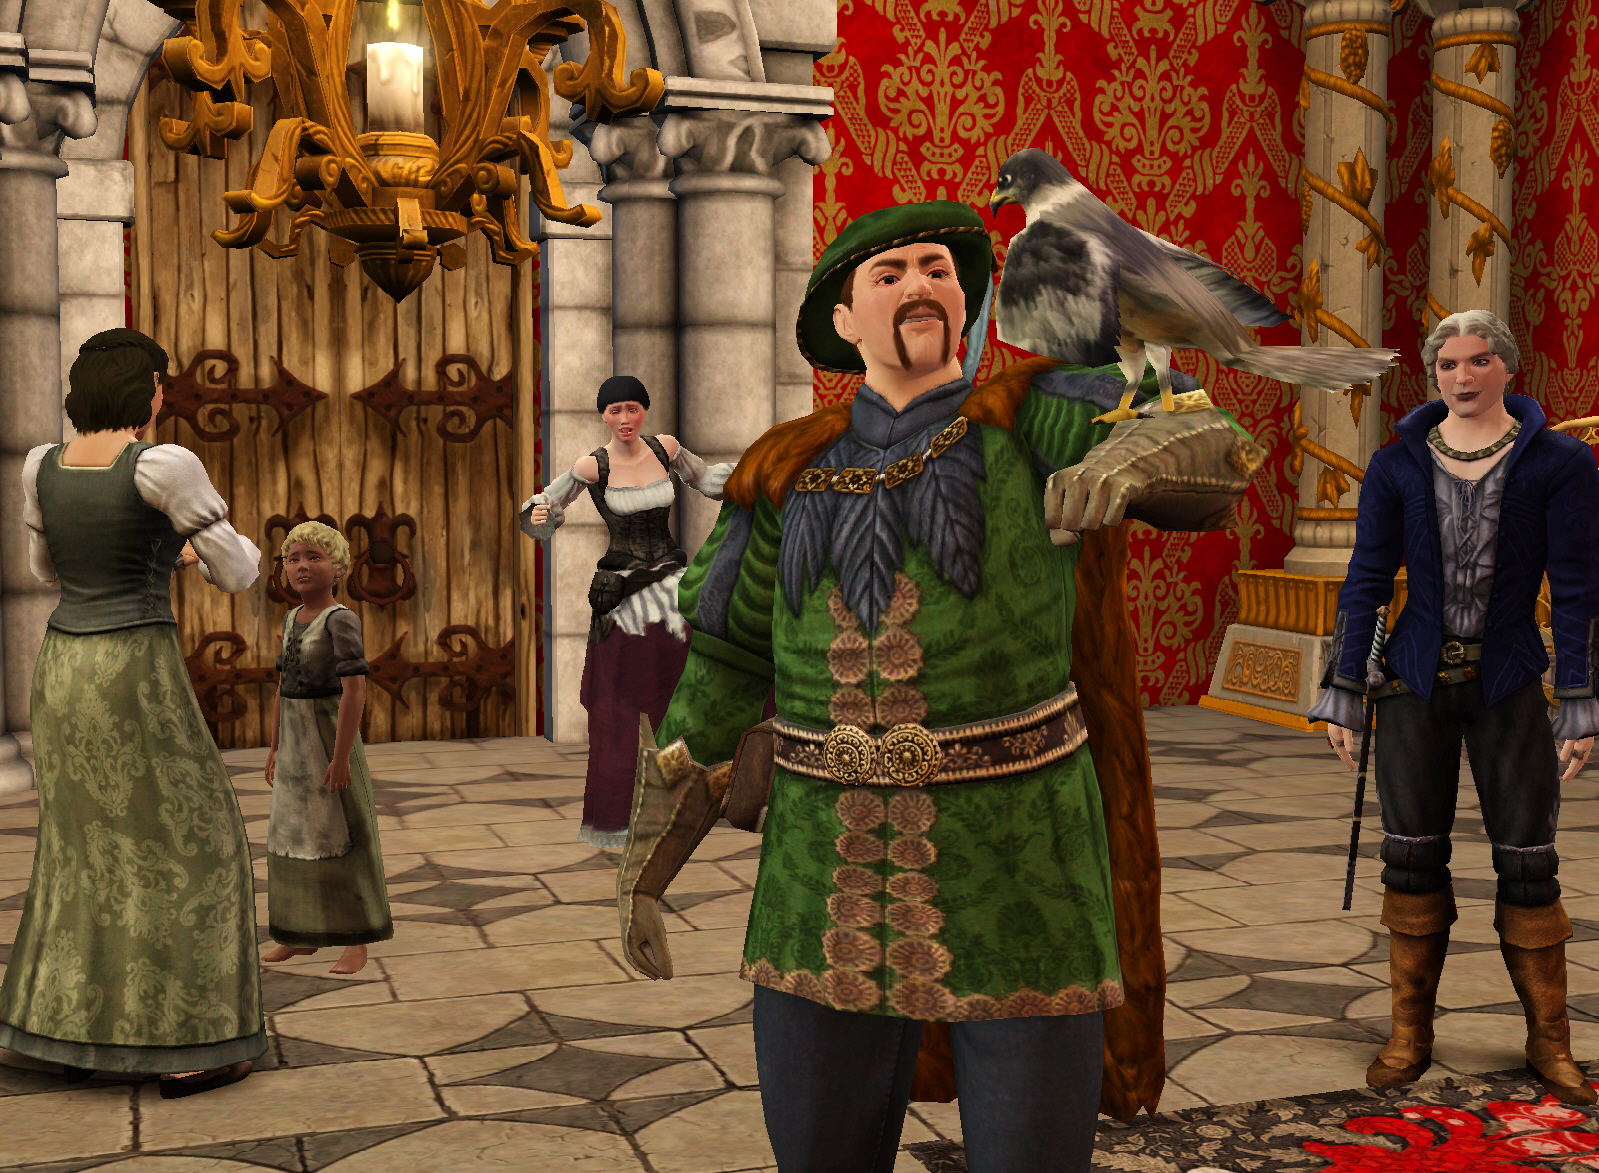 cheats for the sims medieval pirates and nobles